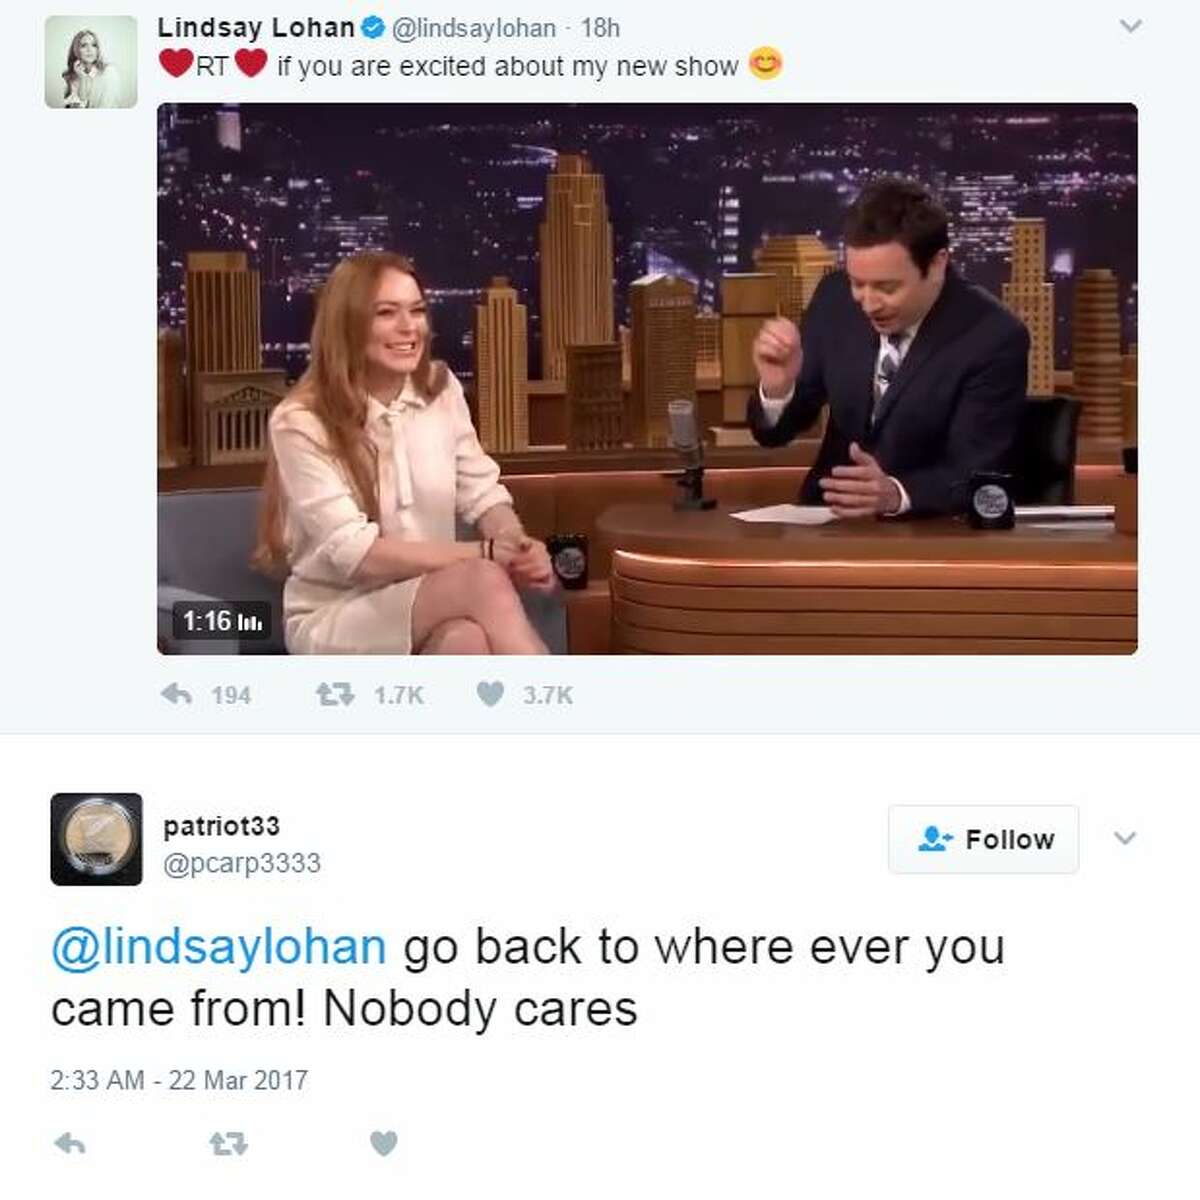 Lindsay Lohan got roasted on twitter after sharing a tweet about her new show.